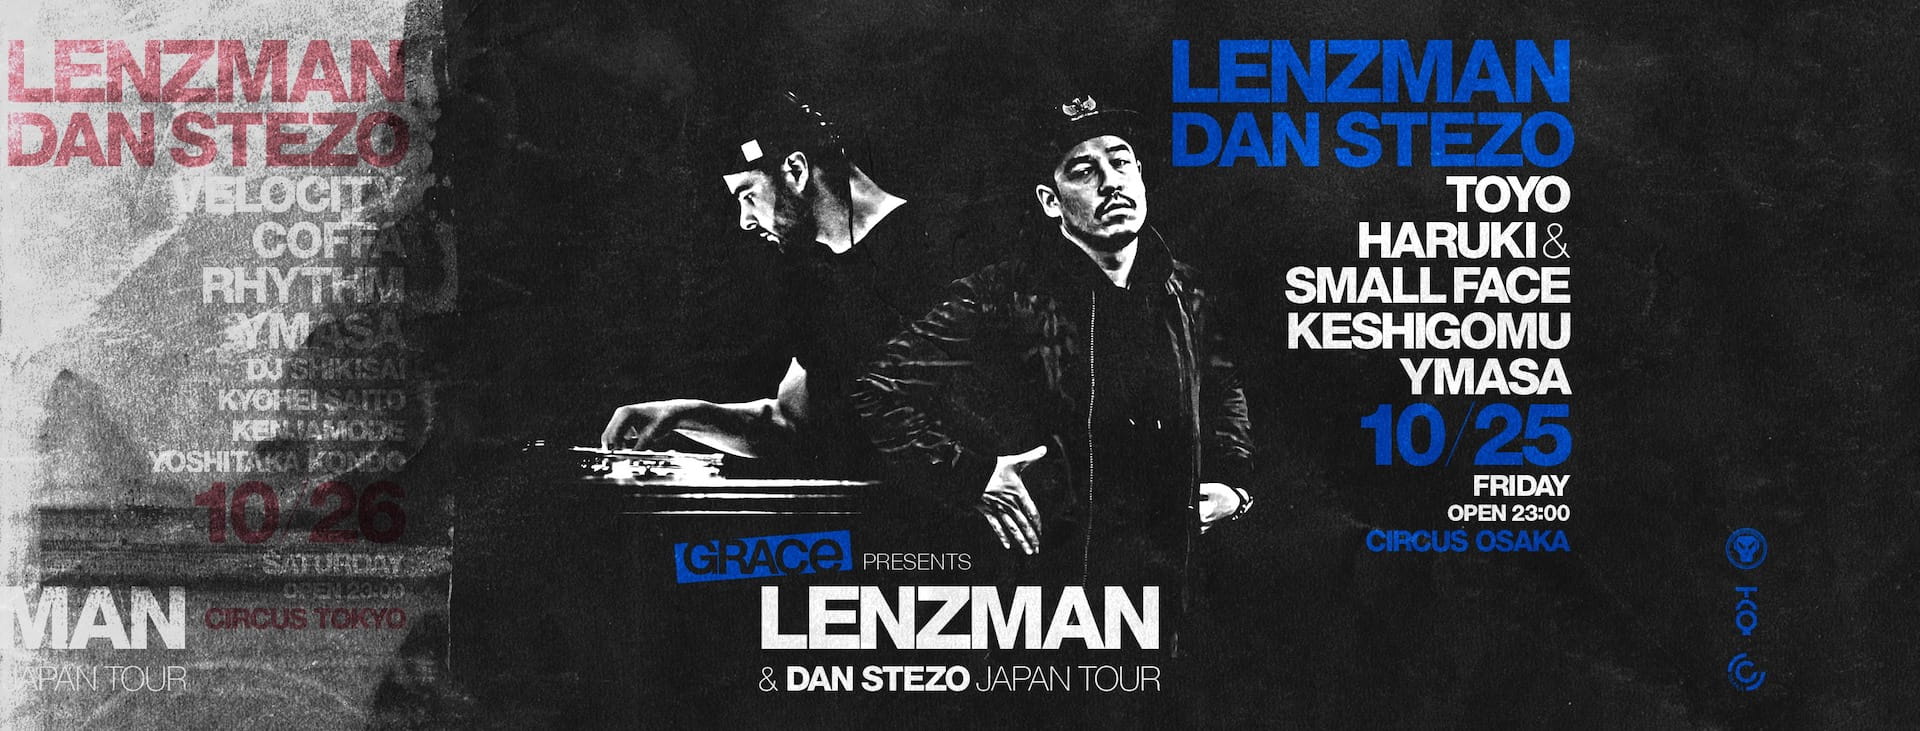 GRACE led by YMASA will hold the first JAPAN TOUR as LENZMAN & DAN STEZO